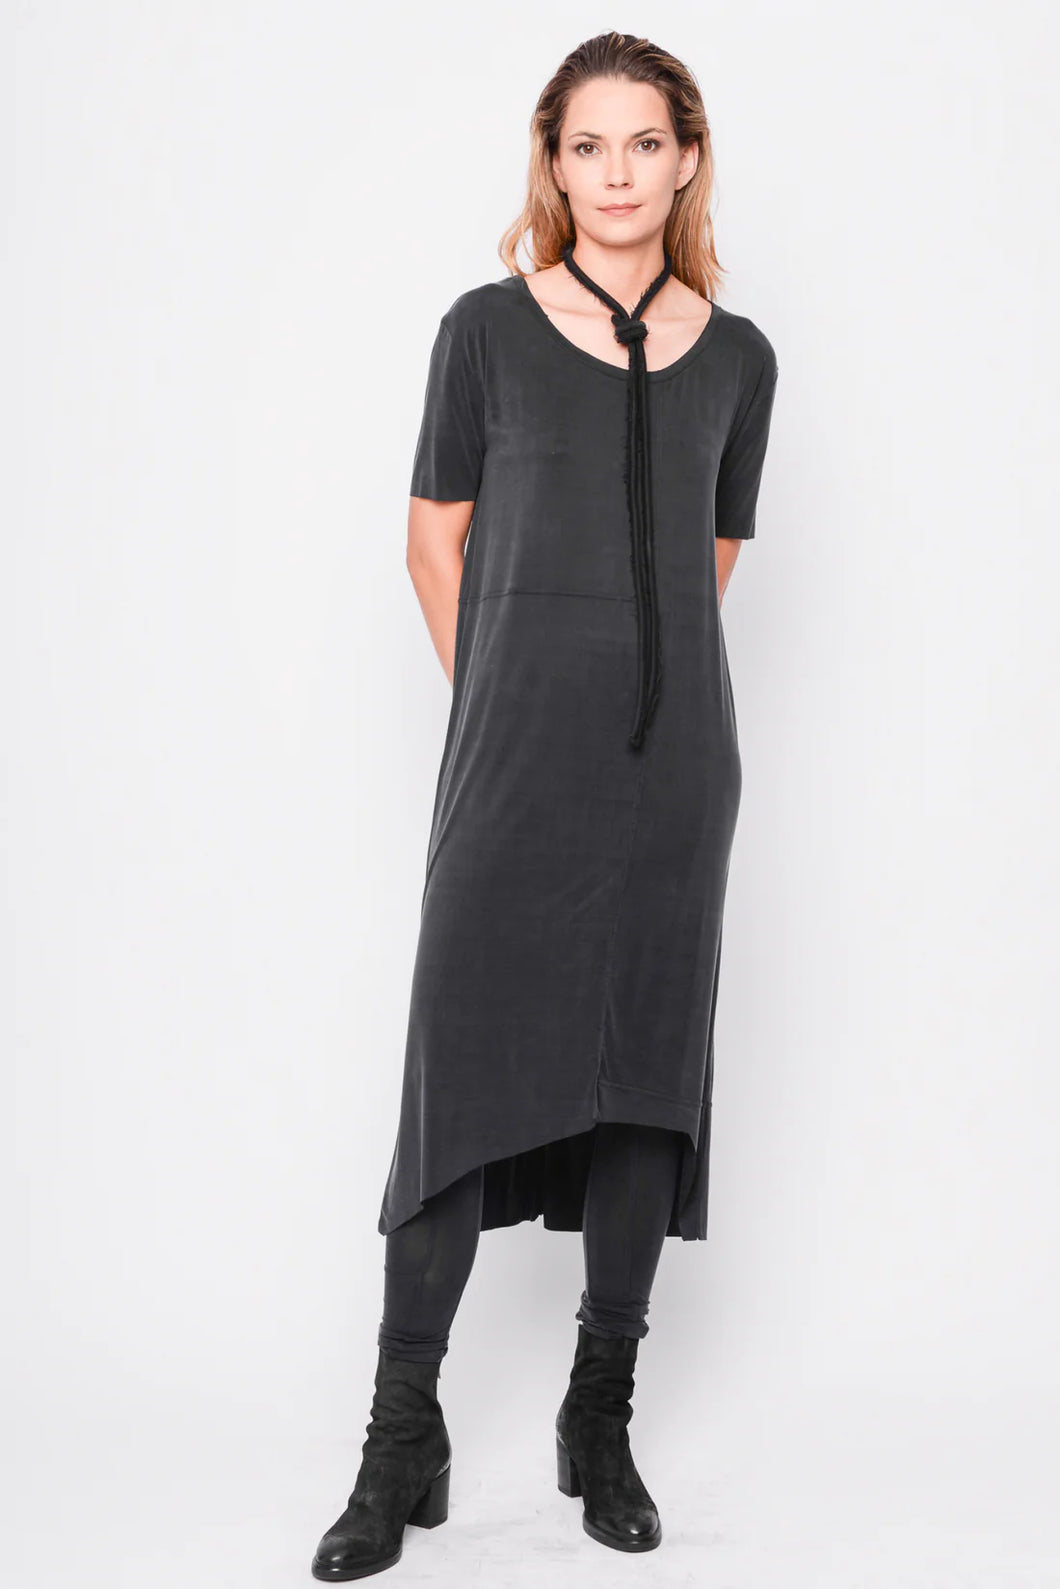 Black by K&M Tunic it Must have been Love